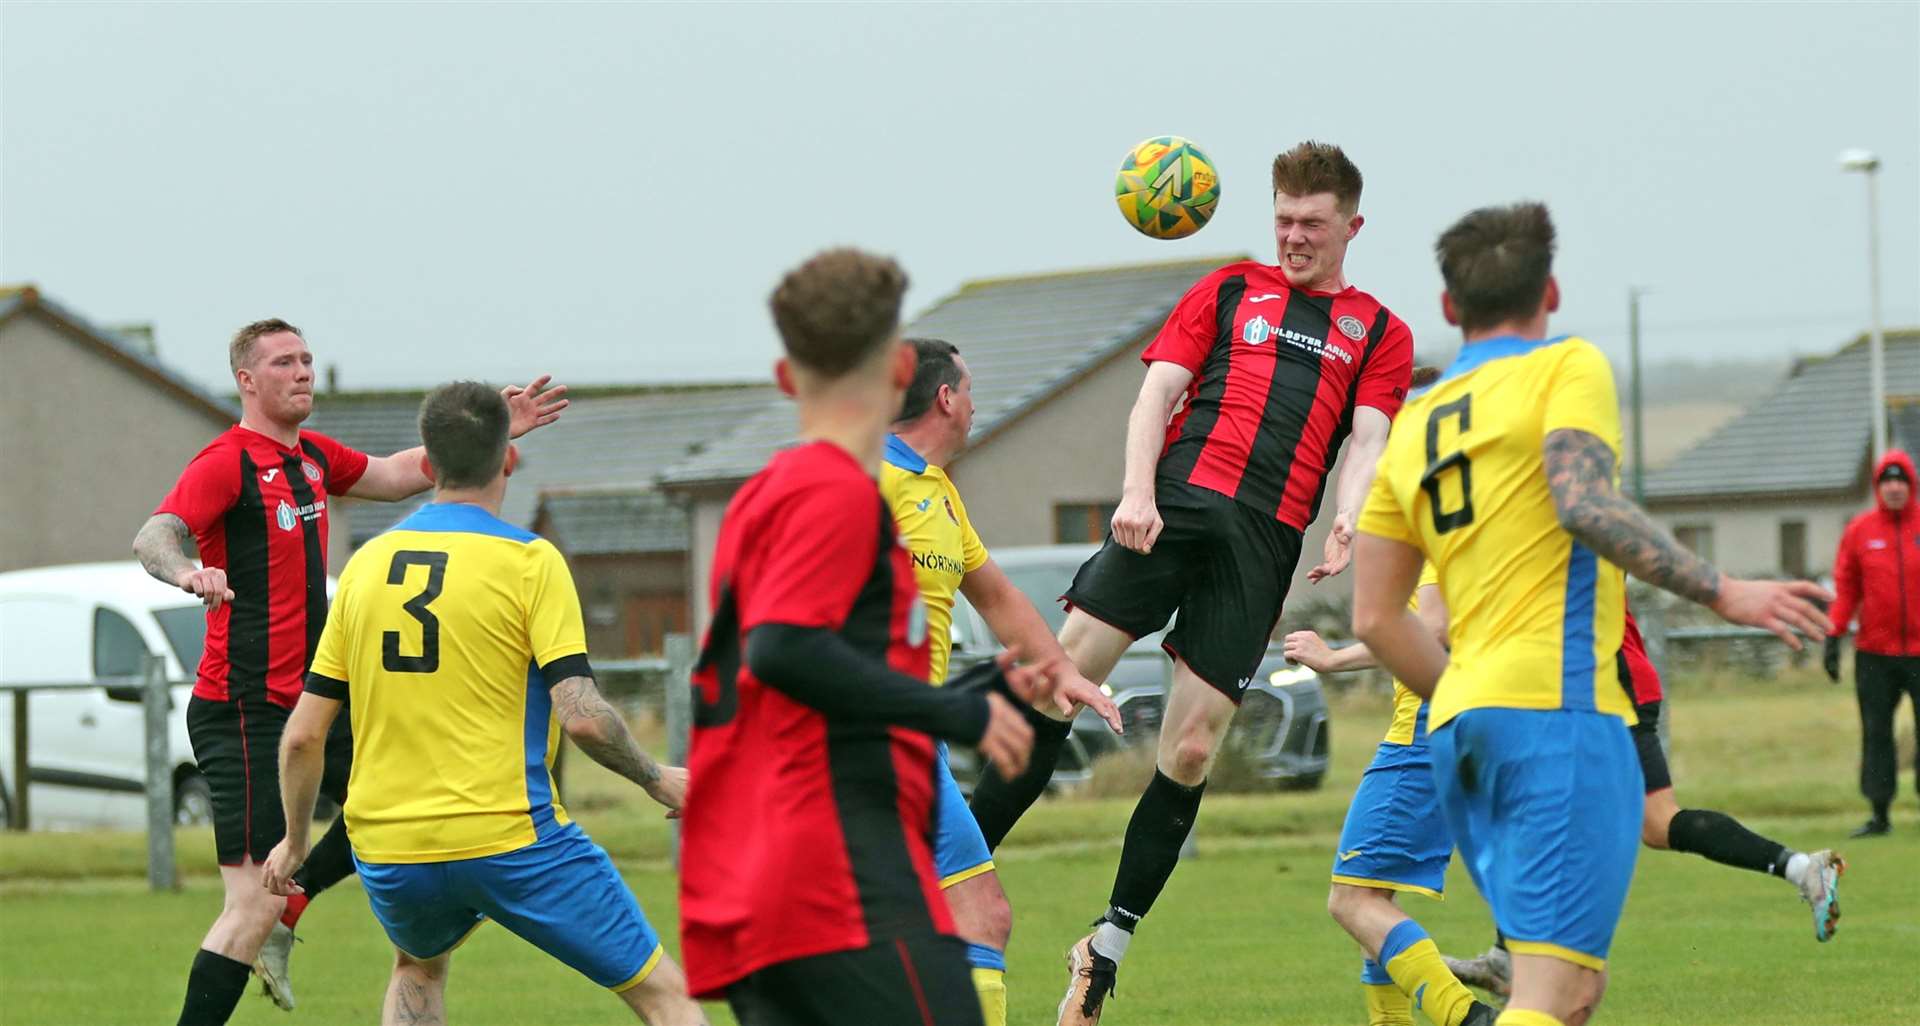 Aaron McNicol was among those praised after Halkirk United's victory at Fort William on Saturday. Picture: James Gunn